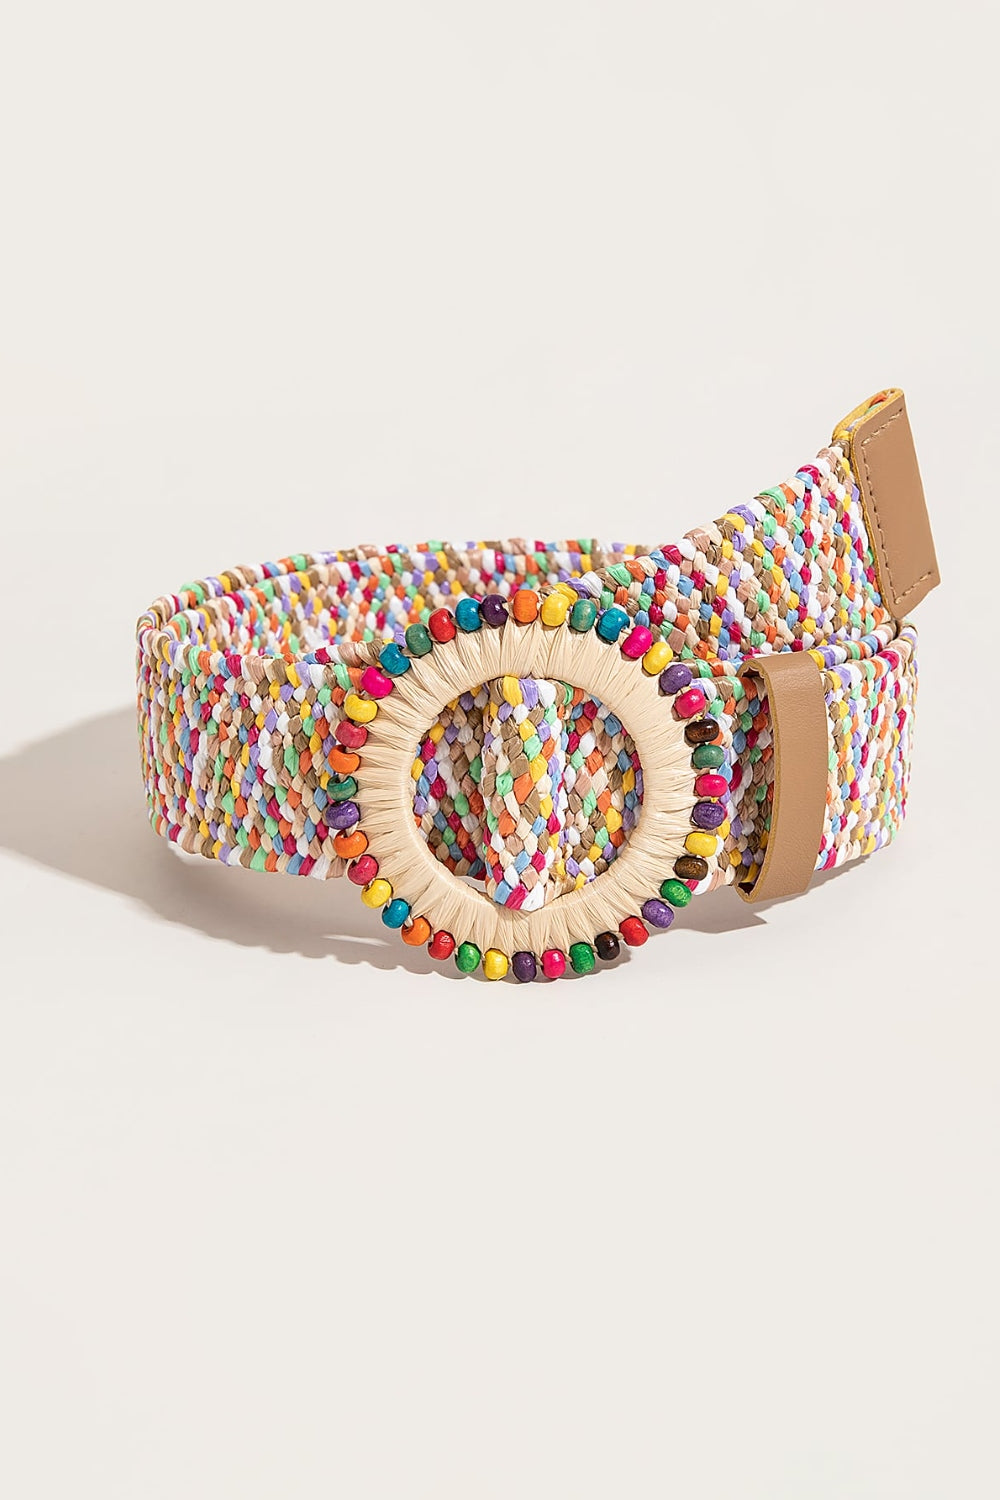 Multicolored Beaded Round Buckle Belt Multicolor One Size 